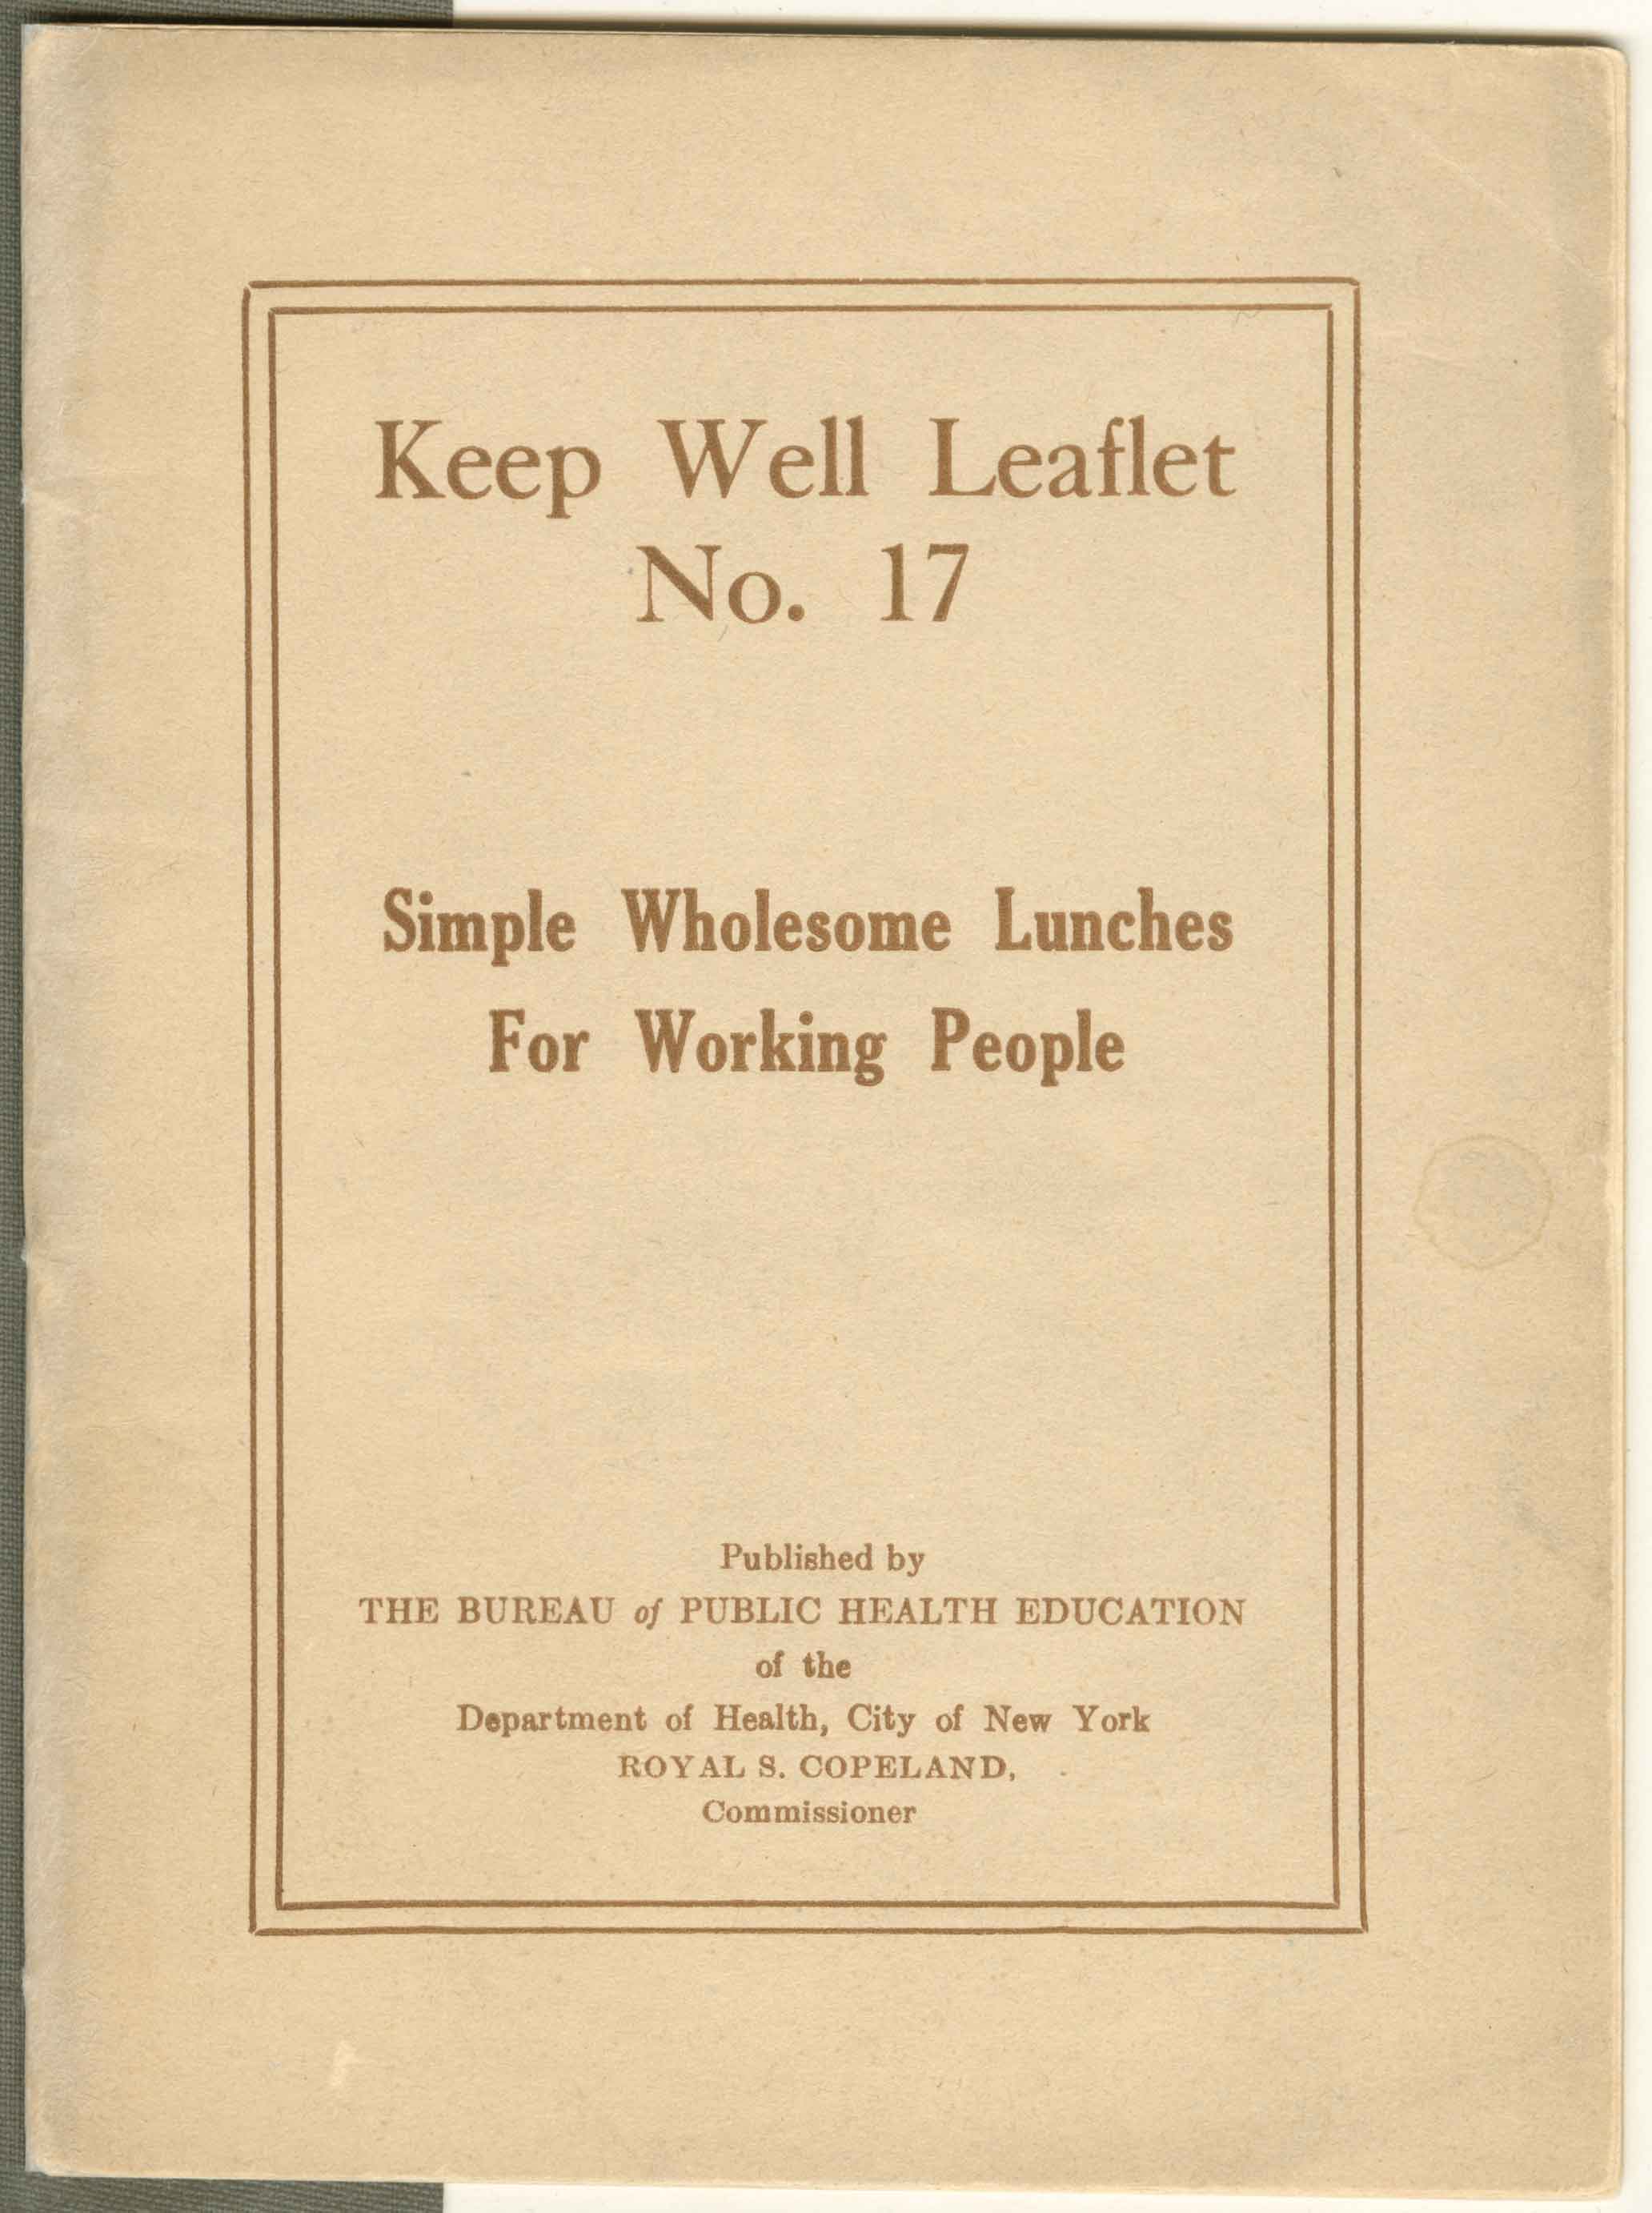 Cover of a Keep Well Leaflet from the New York City Department of Health published circa 1920 titled Simple Wholesome Lunches for Working People.